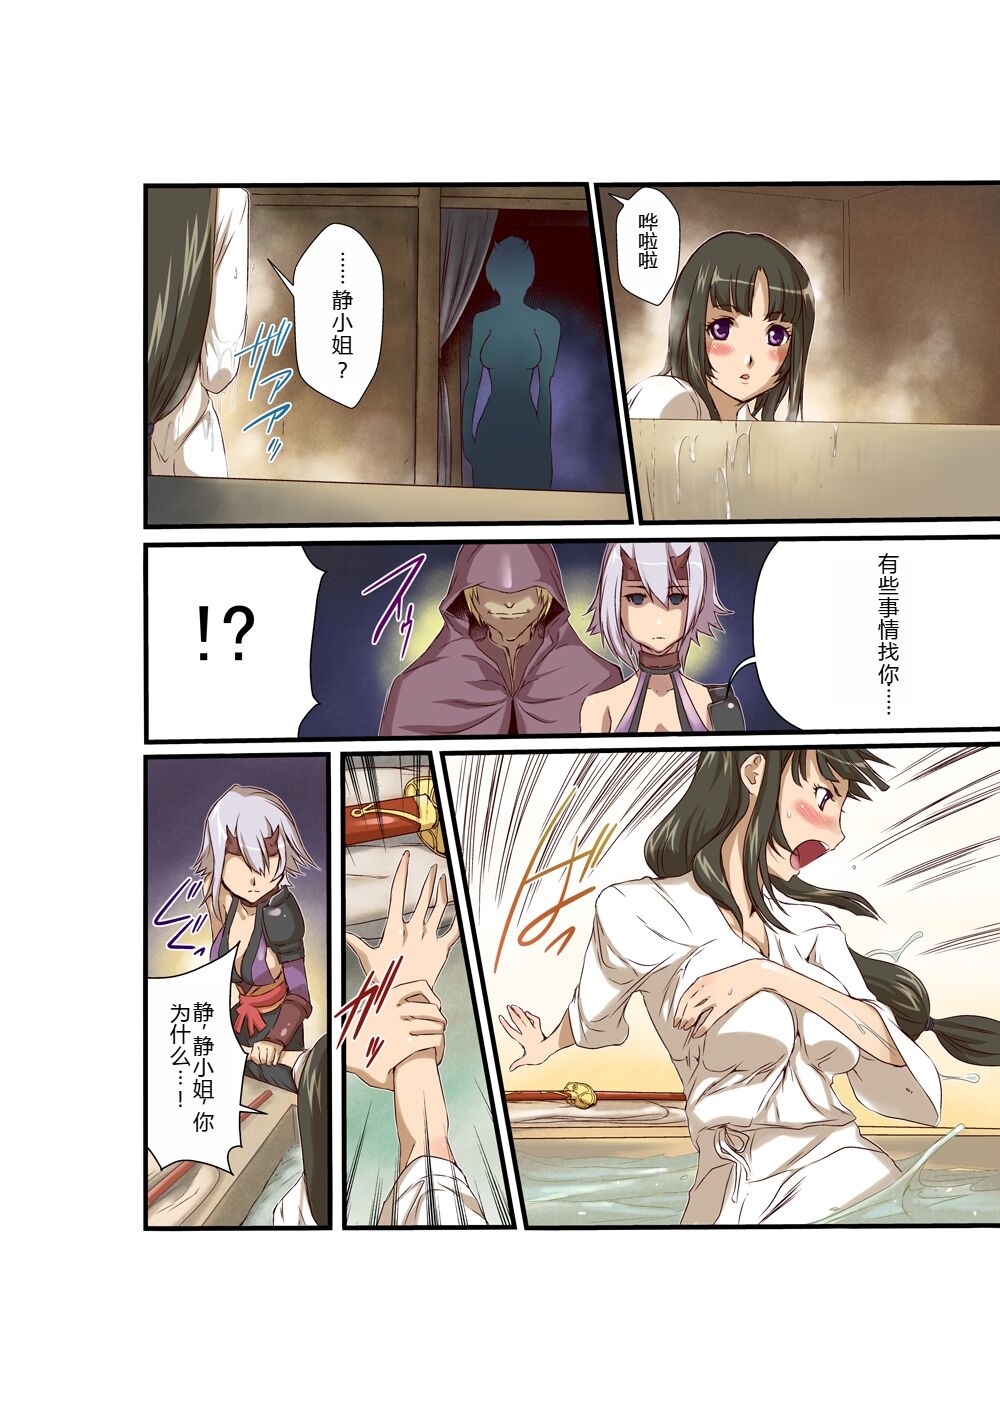 [Utsuro na Hitomi] Queen's *lade Mind-control Manga (Queen's Blade) [chinese] [lalala1234个人机翻汉化] 5